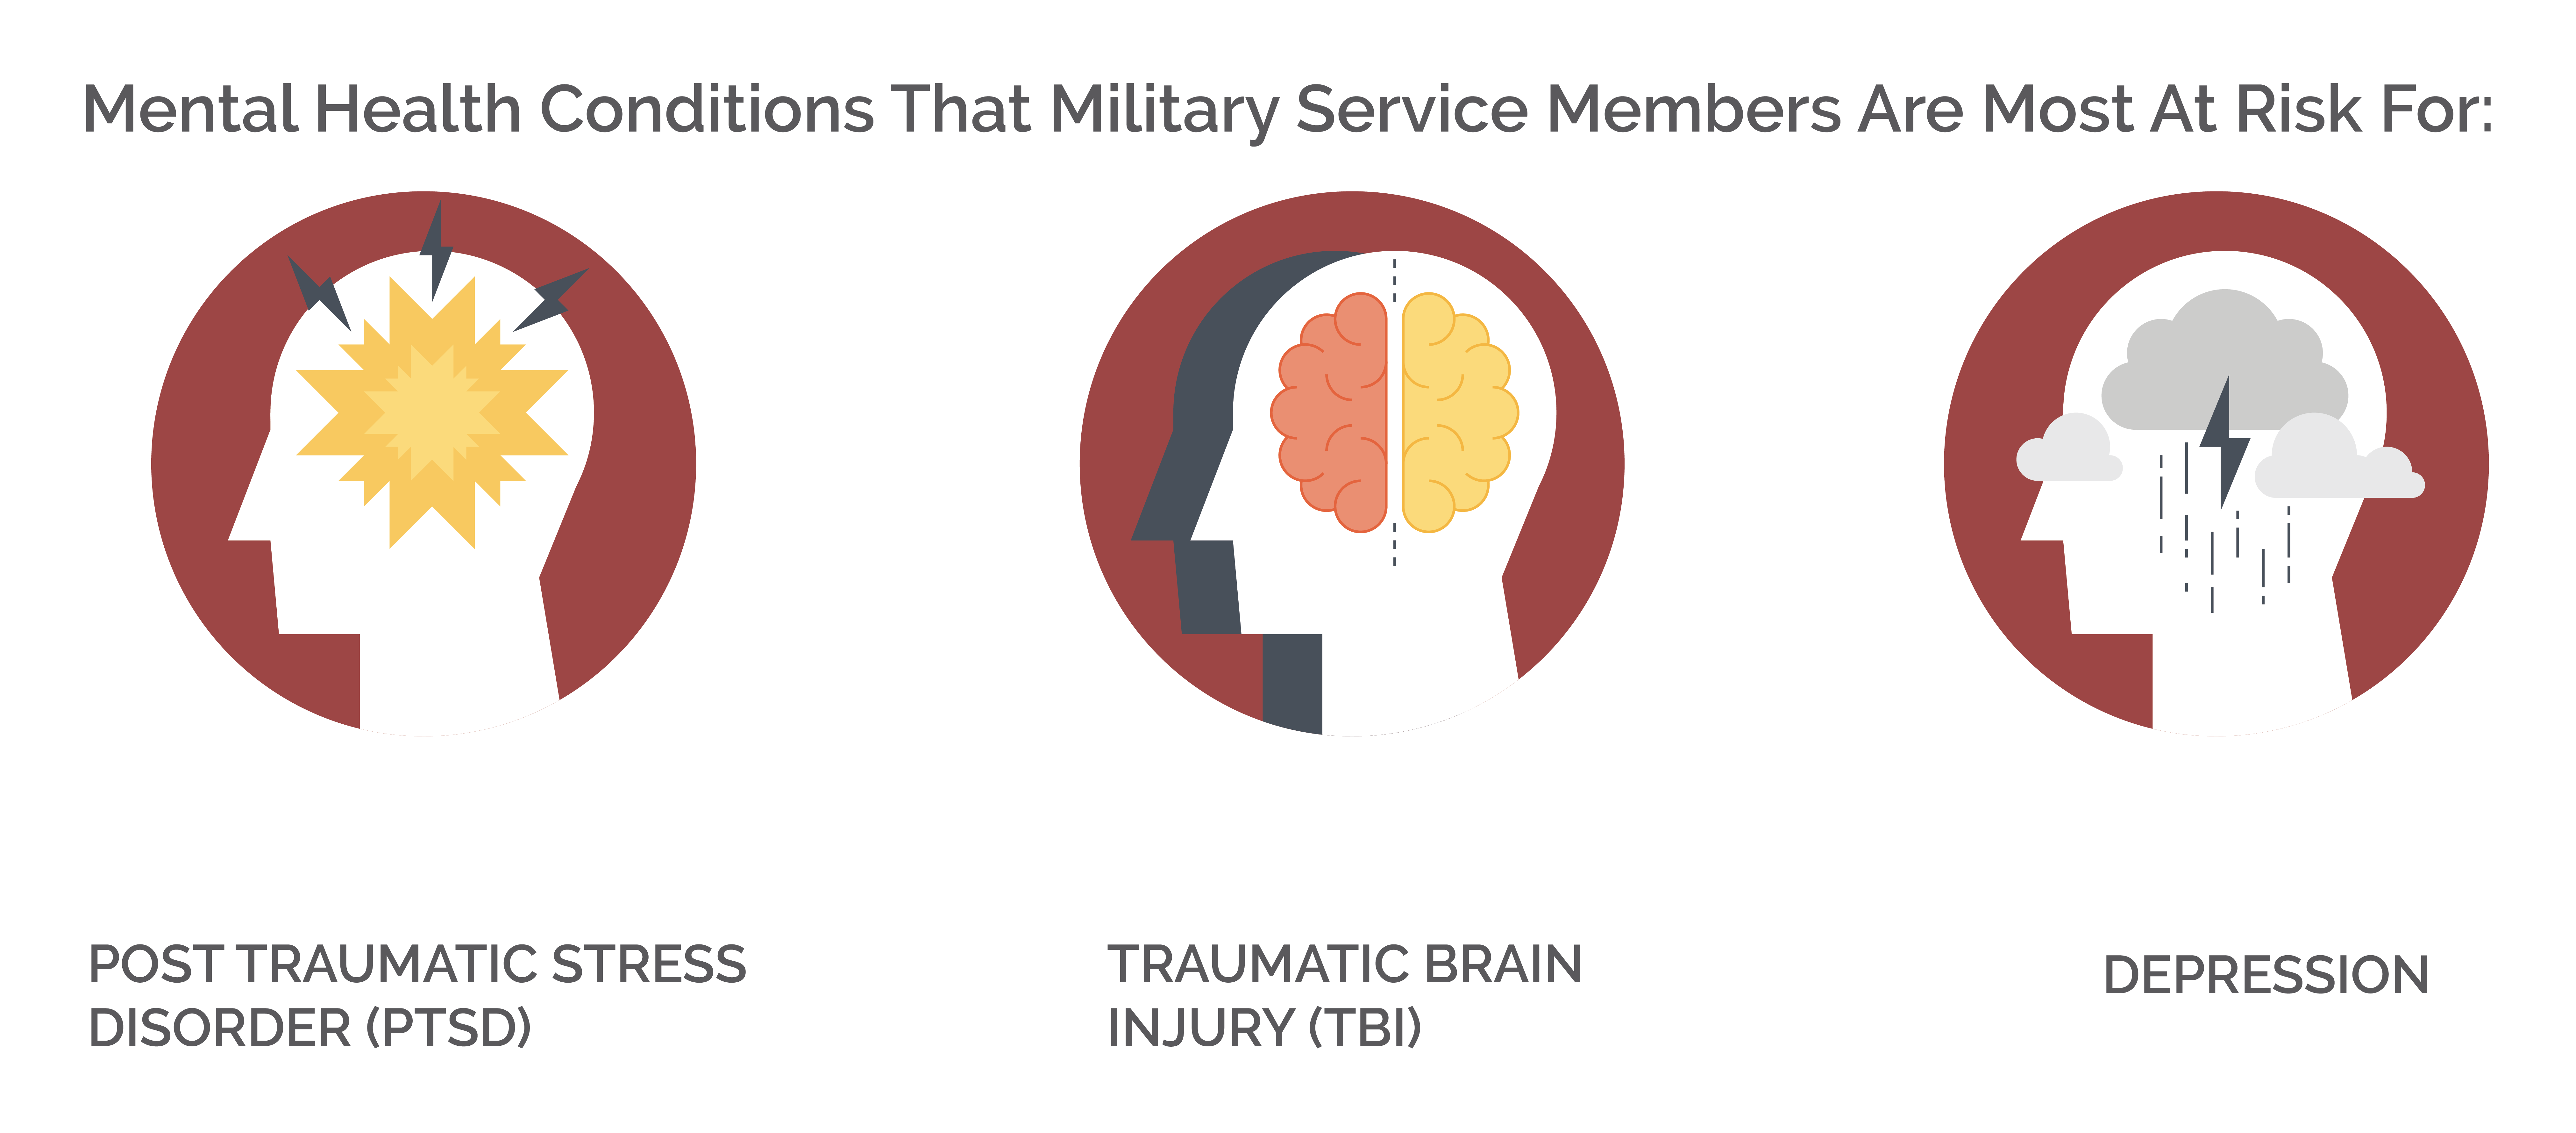 Mental Health Treatment for California Military - At Risk Conditions